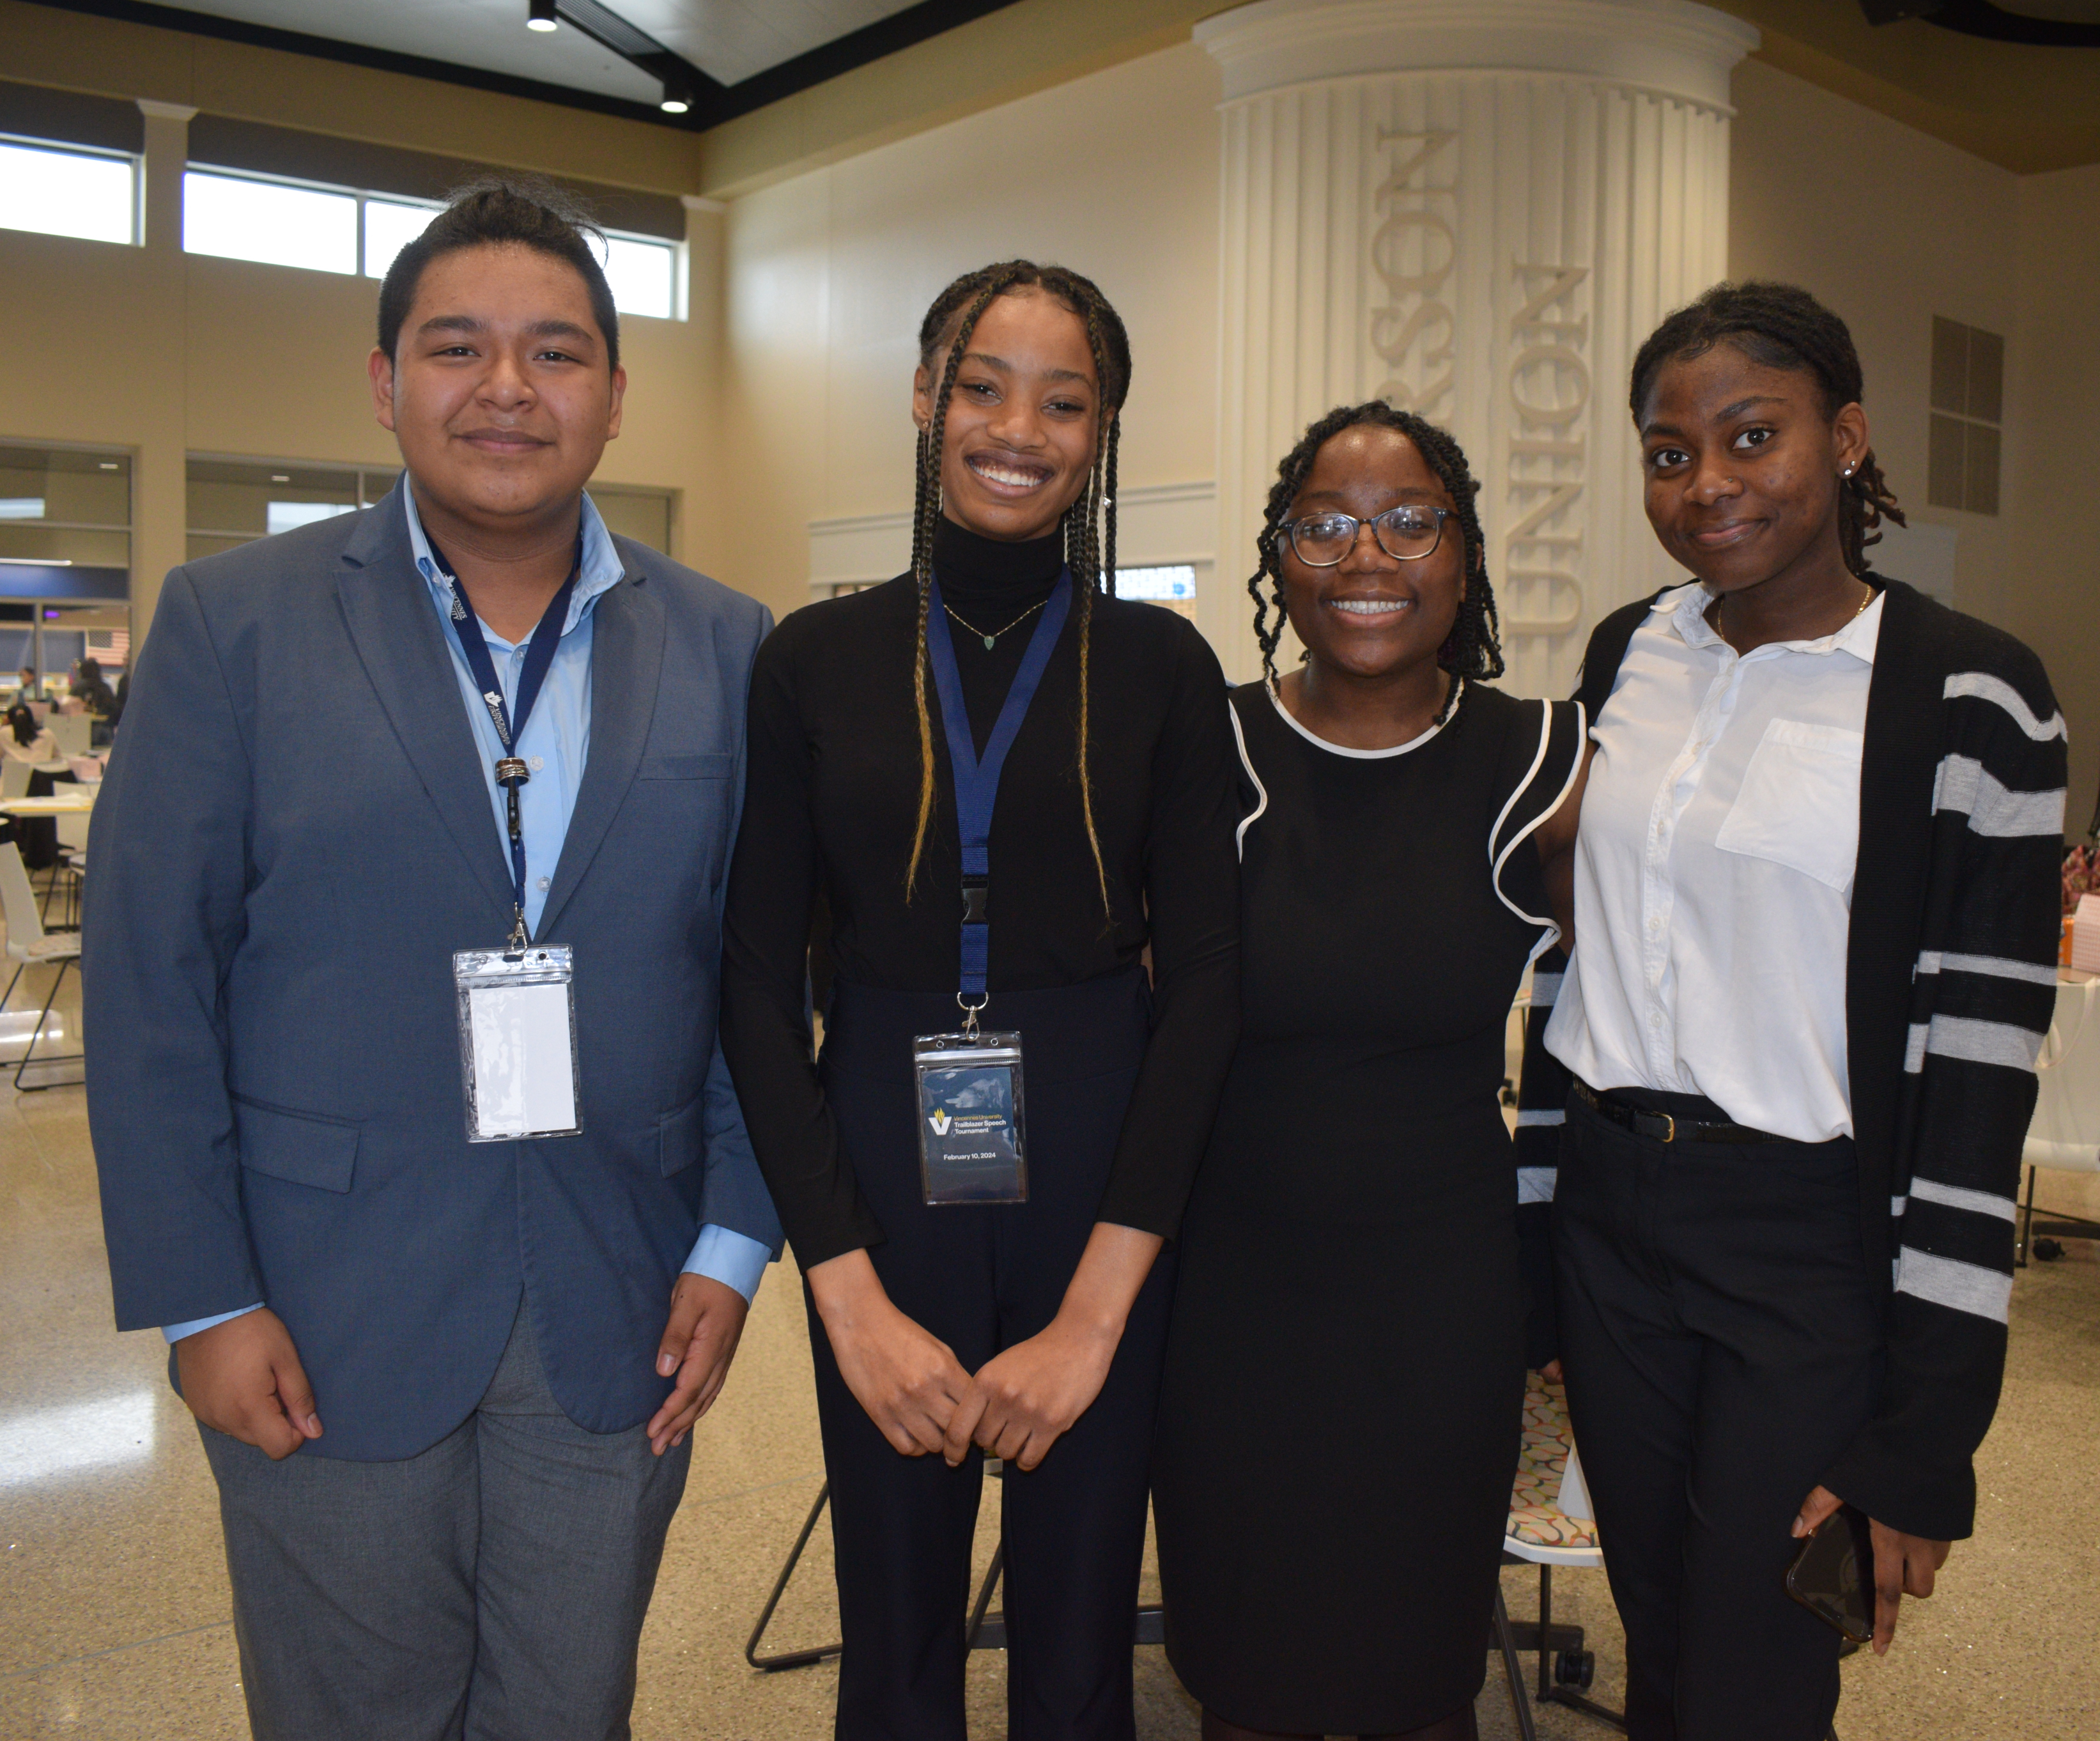 Four high school students of color dressed in professional attire pose for a photograph in Jefferson Student Union.